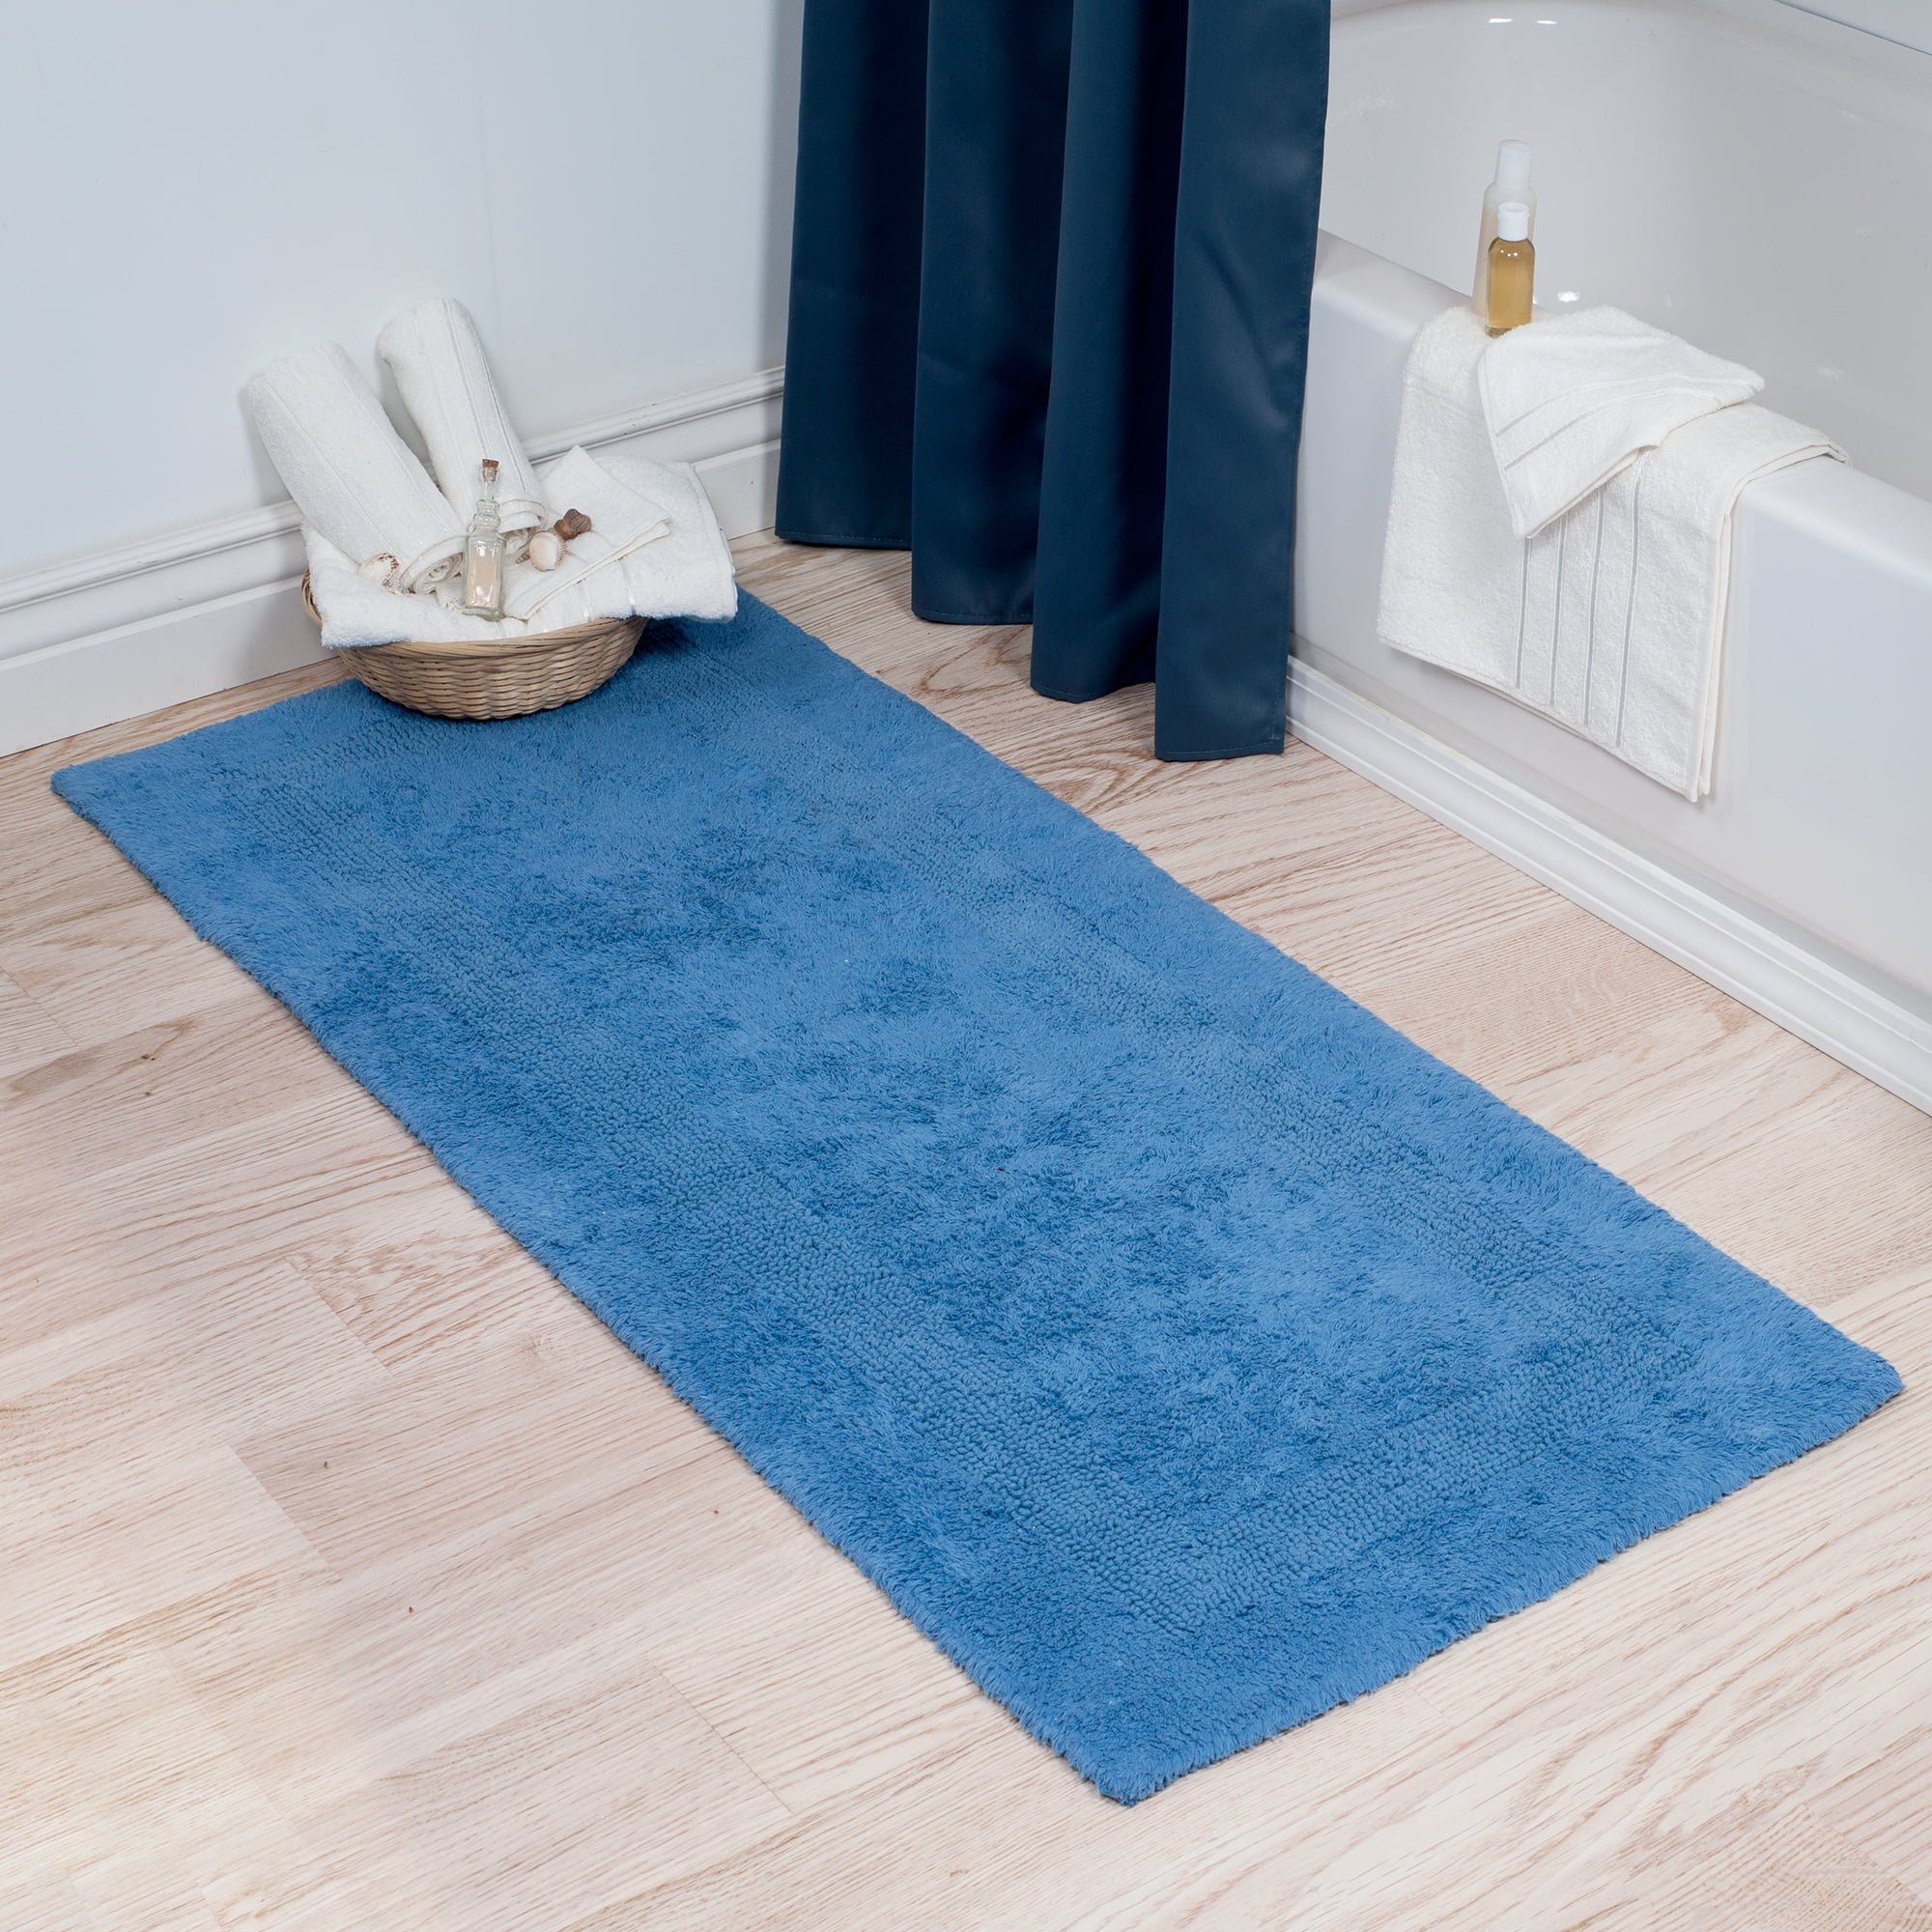 Bath Mat in Navy 100%  Supersoft Deep Pile Cotton   CLEARANCE SALE 